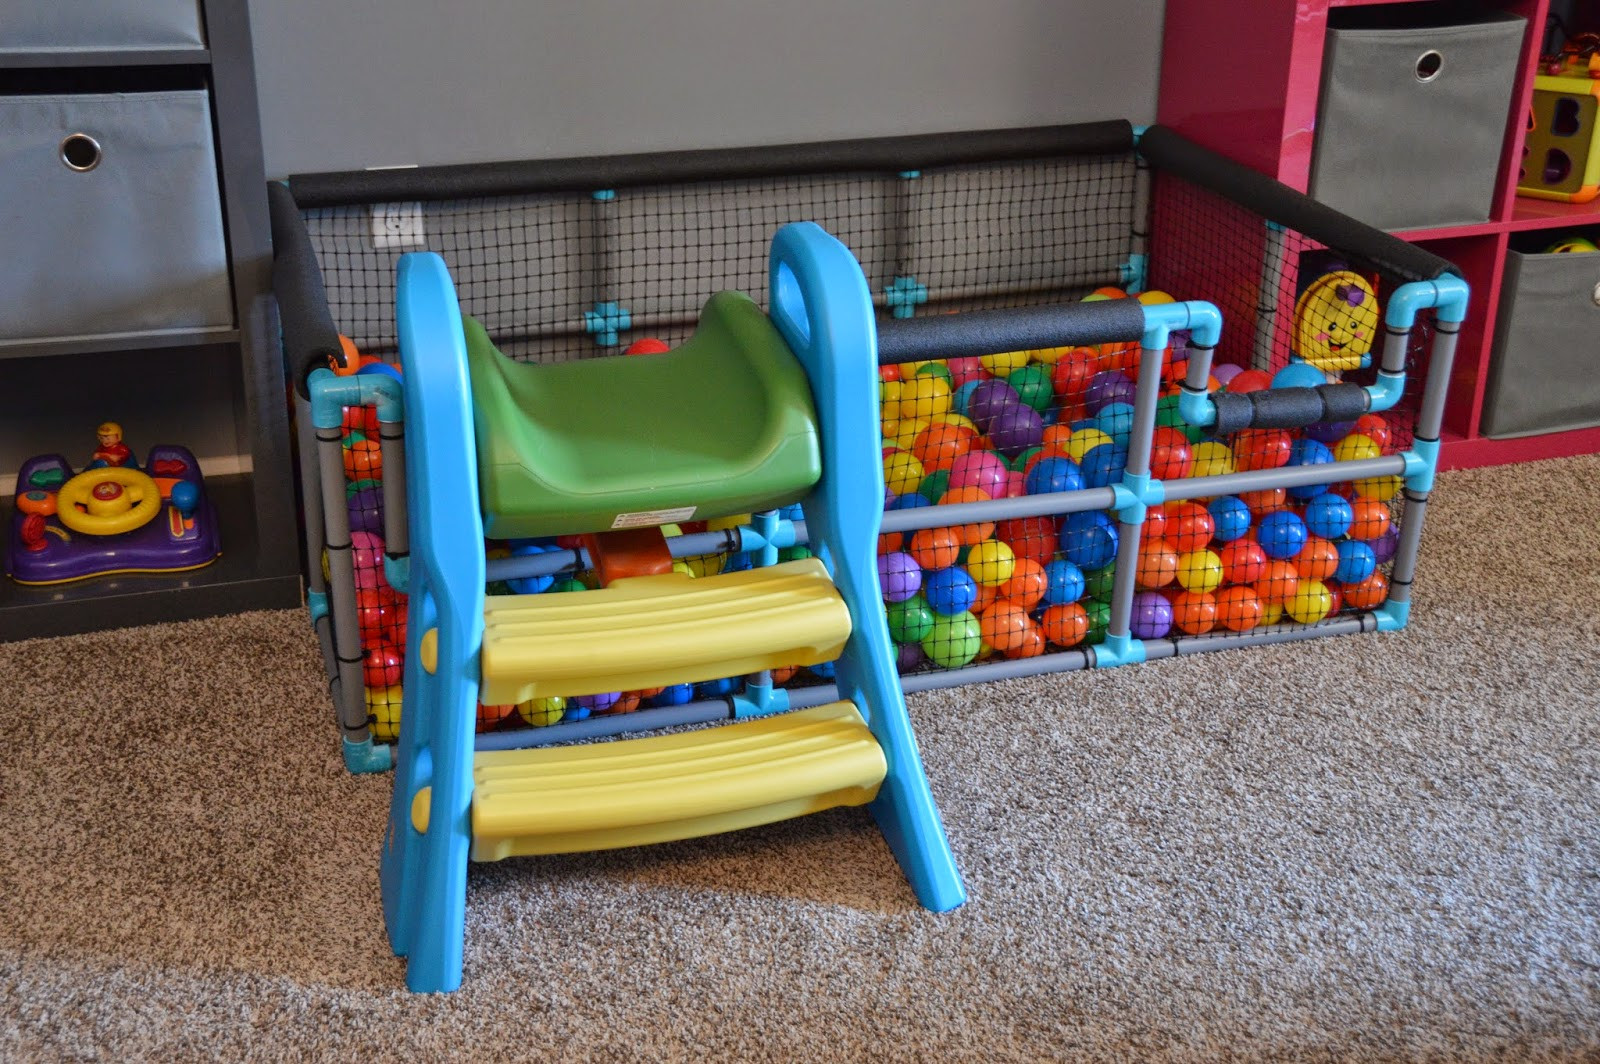 DIY Ball Pit For Toddlers
 Tour of Our Home Playroom The Journey of Parenthood